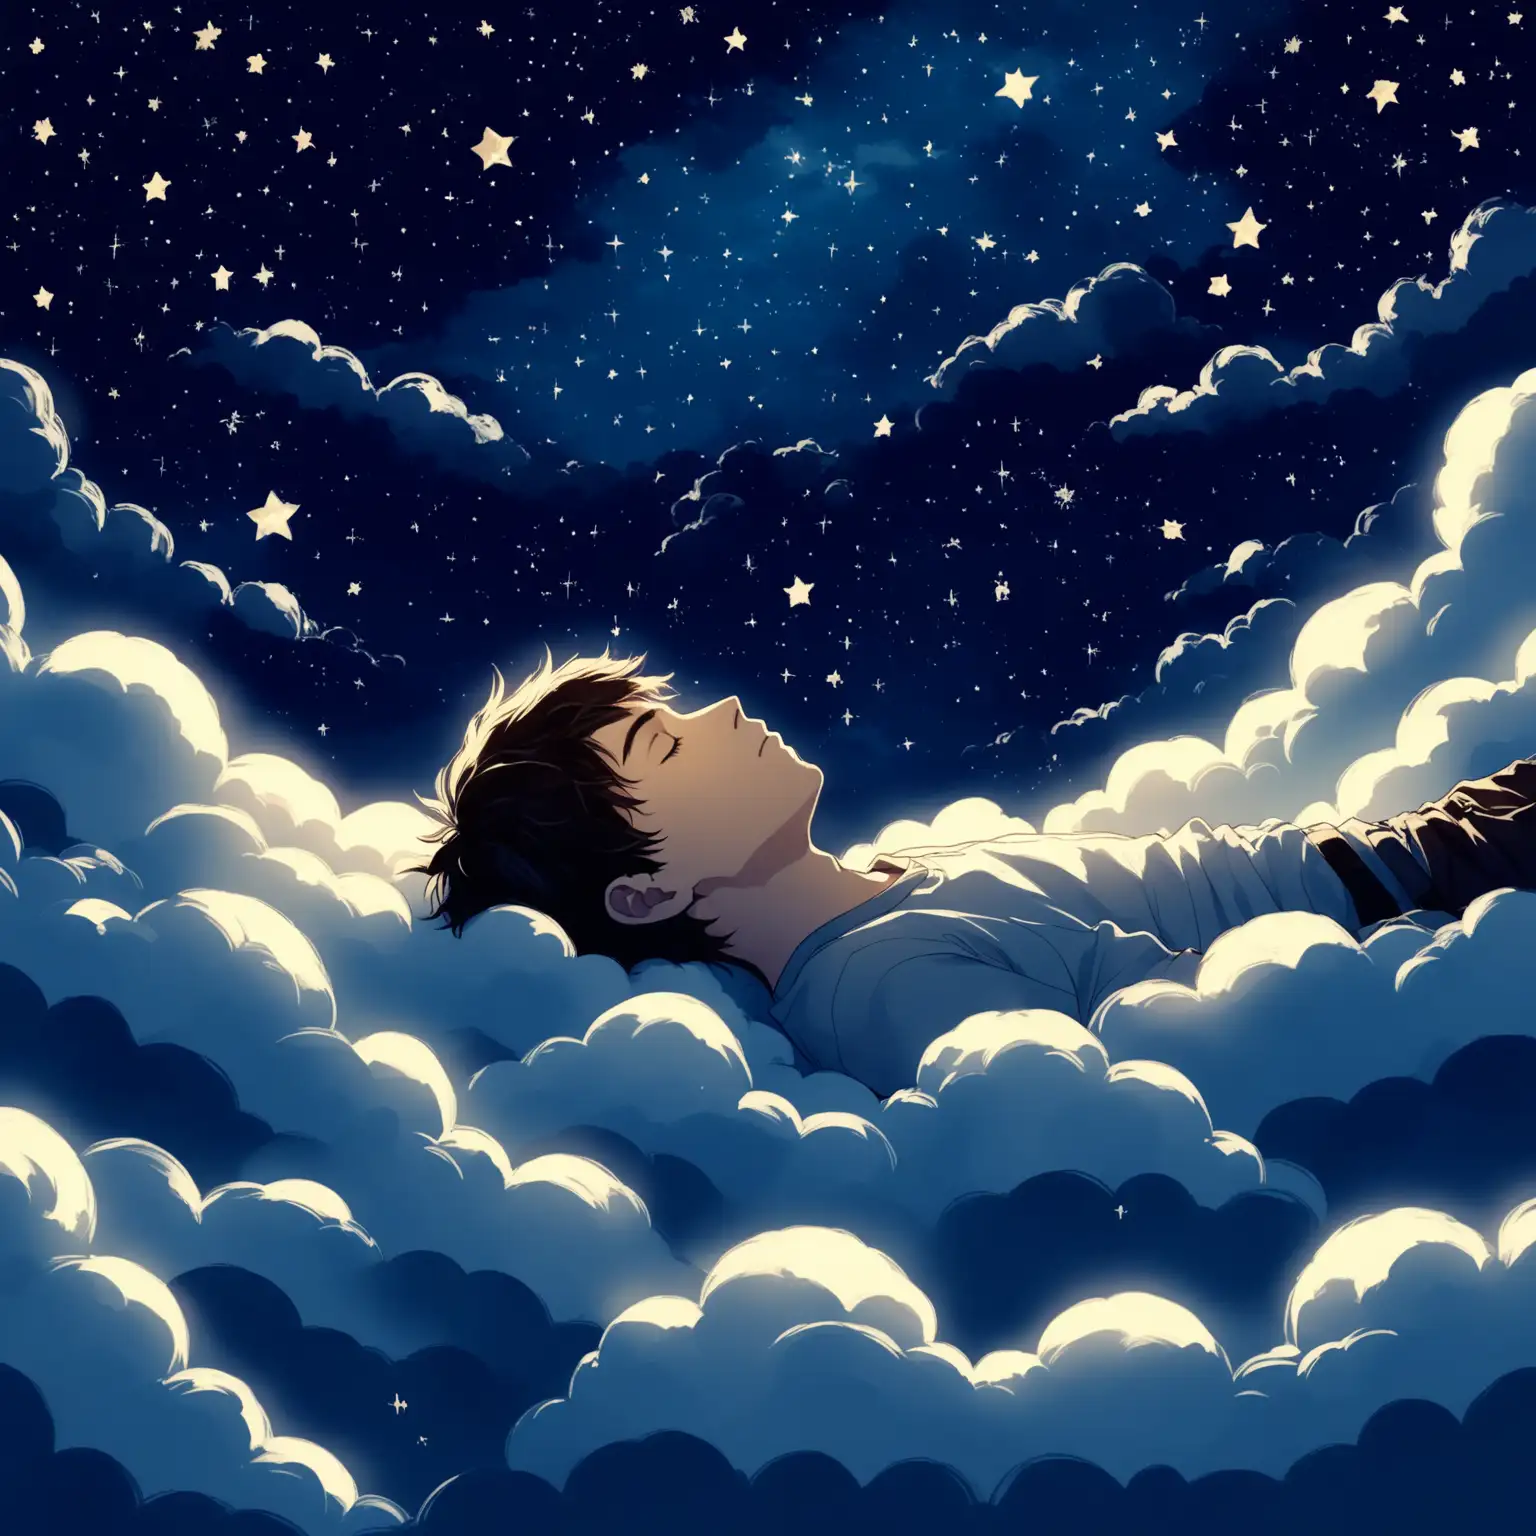 nighttime a 24-year-old sunny open-minded young man lying on a patch of clouds sleeping, he is facing the sky, with several scattered clouds around, and the air is full of stars